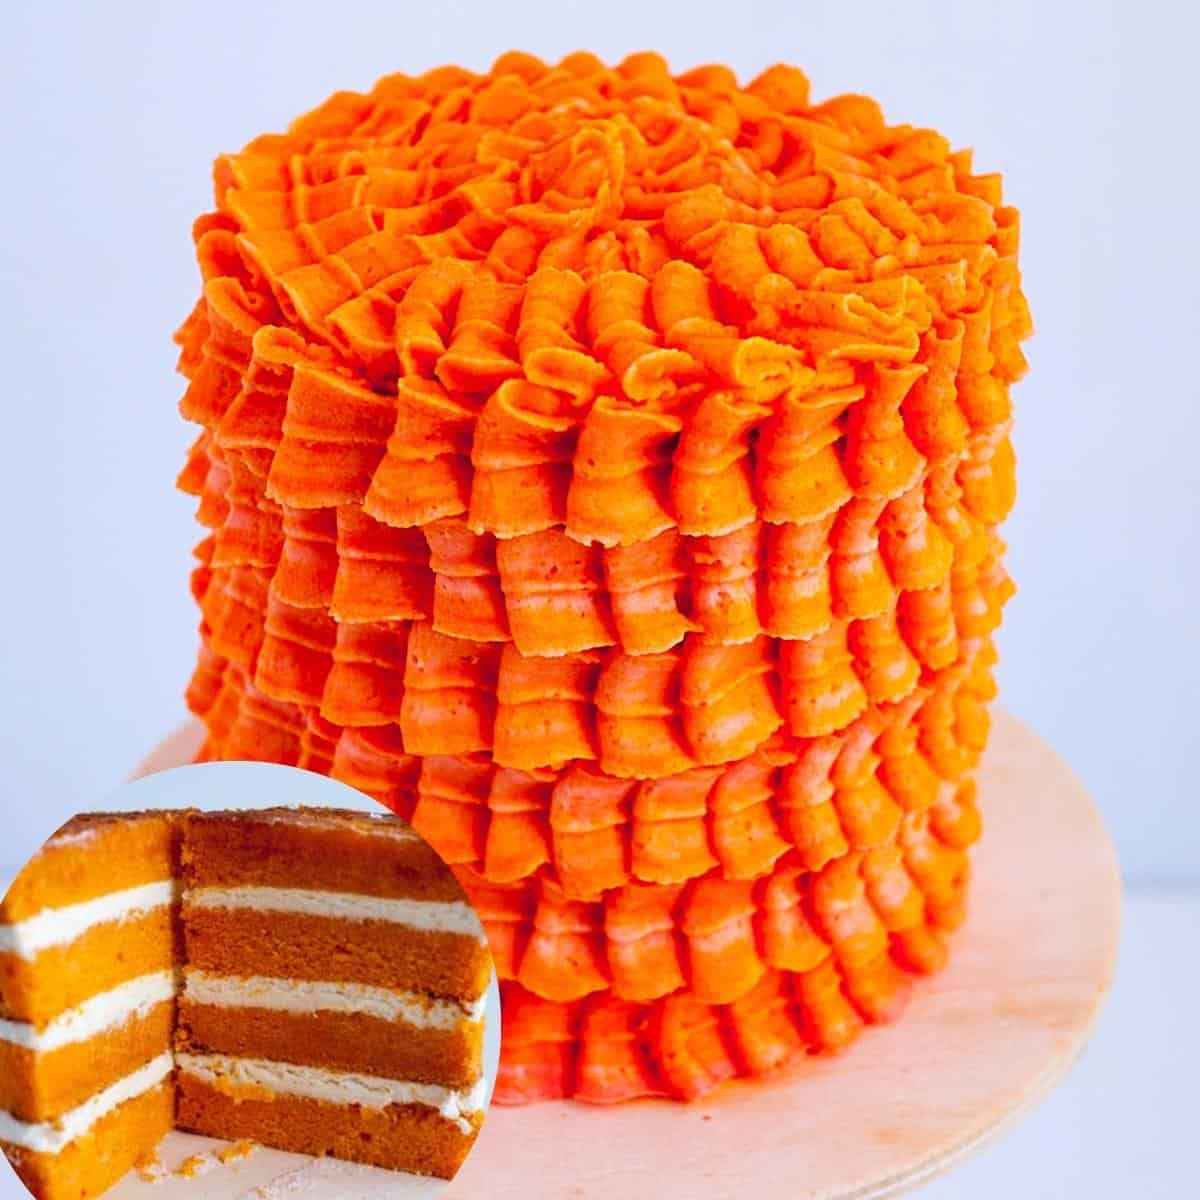 A frosted layer cake with orange Swiss meringue buttercream.